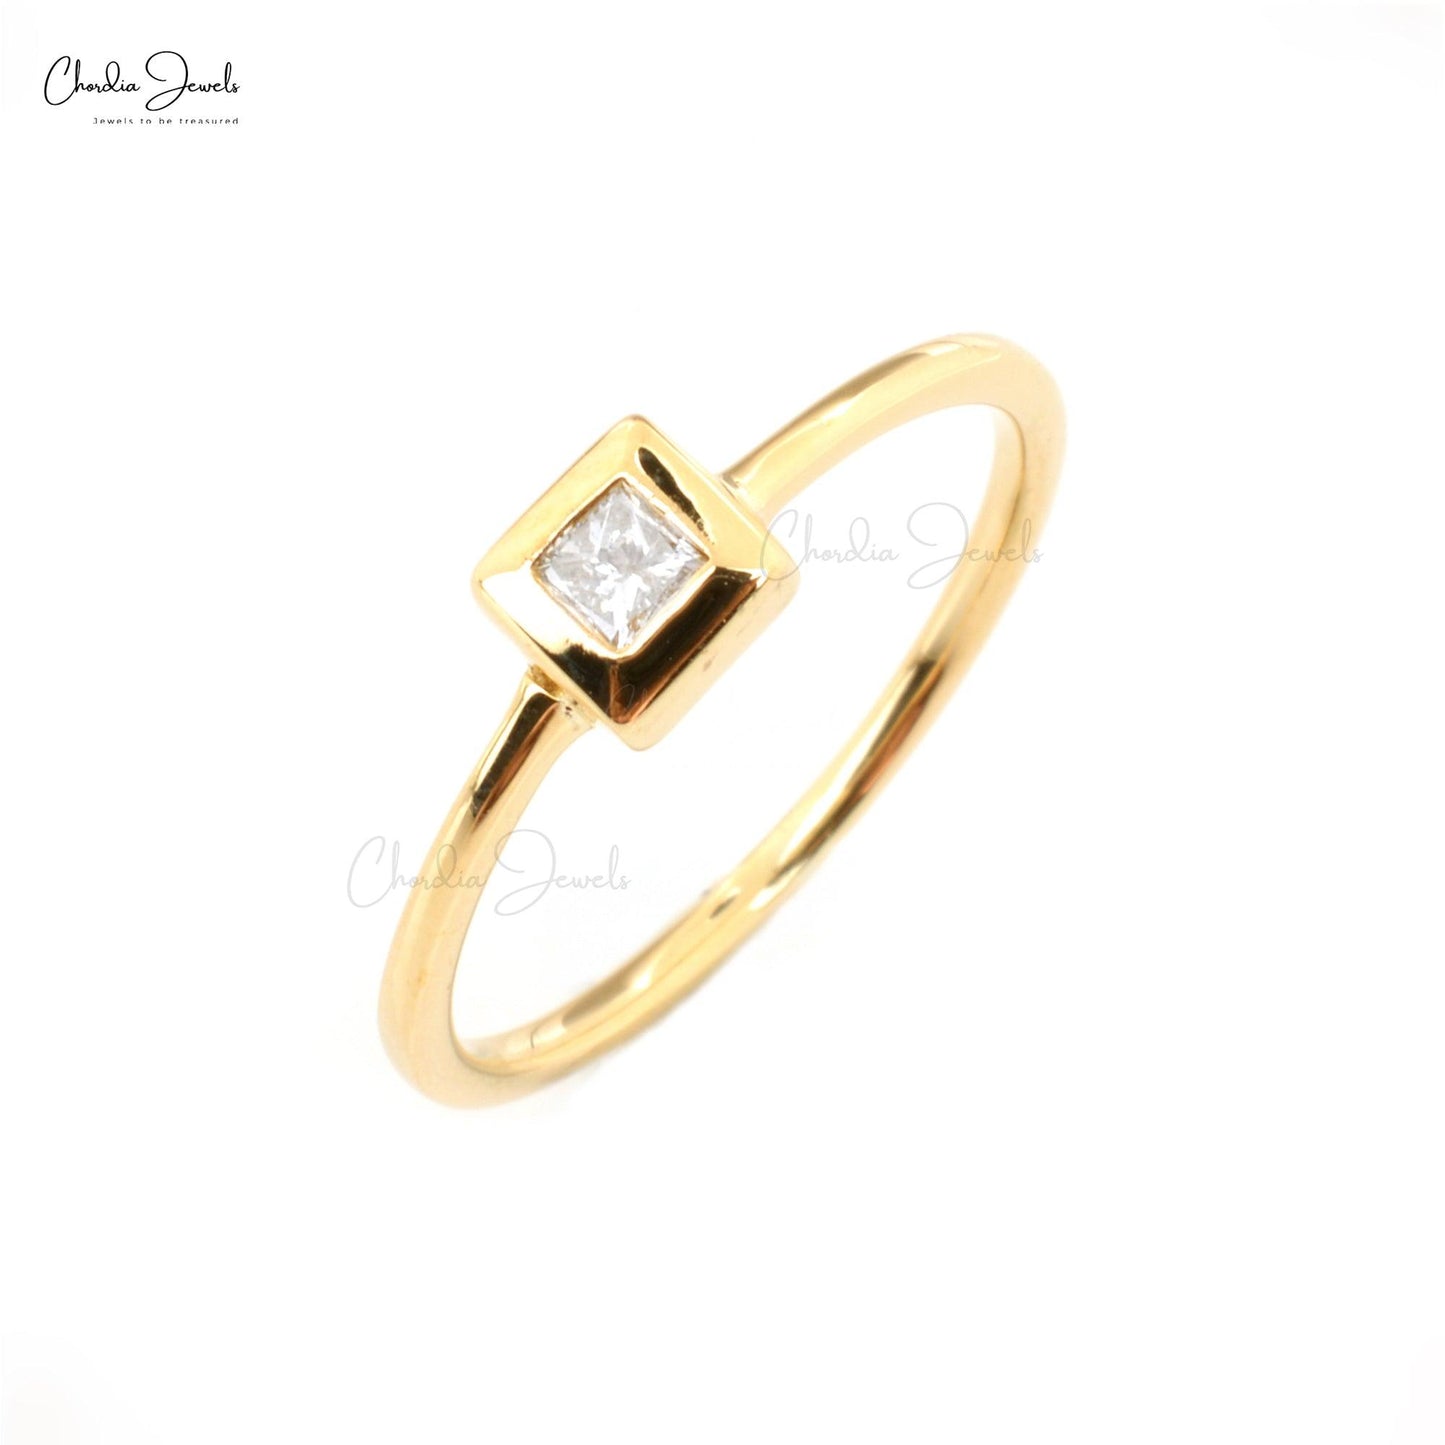 0.07 Carat Natural White Diamond Ring, 14k Solid Yellow Gold 2.4mm Square Princess Cut Bezel Set Ring, Engagement Ring Gift for Her - Chordia Jewels